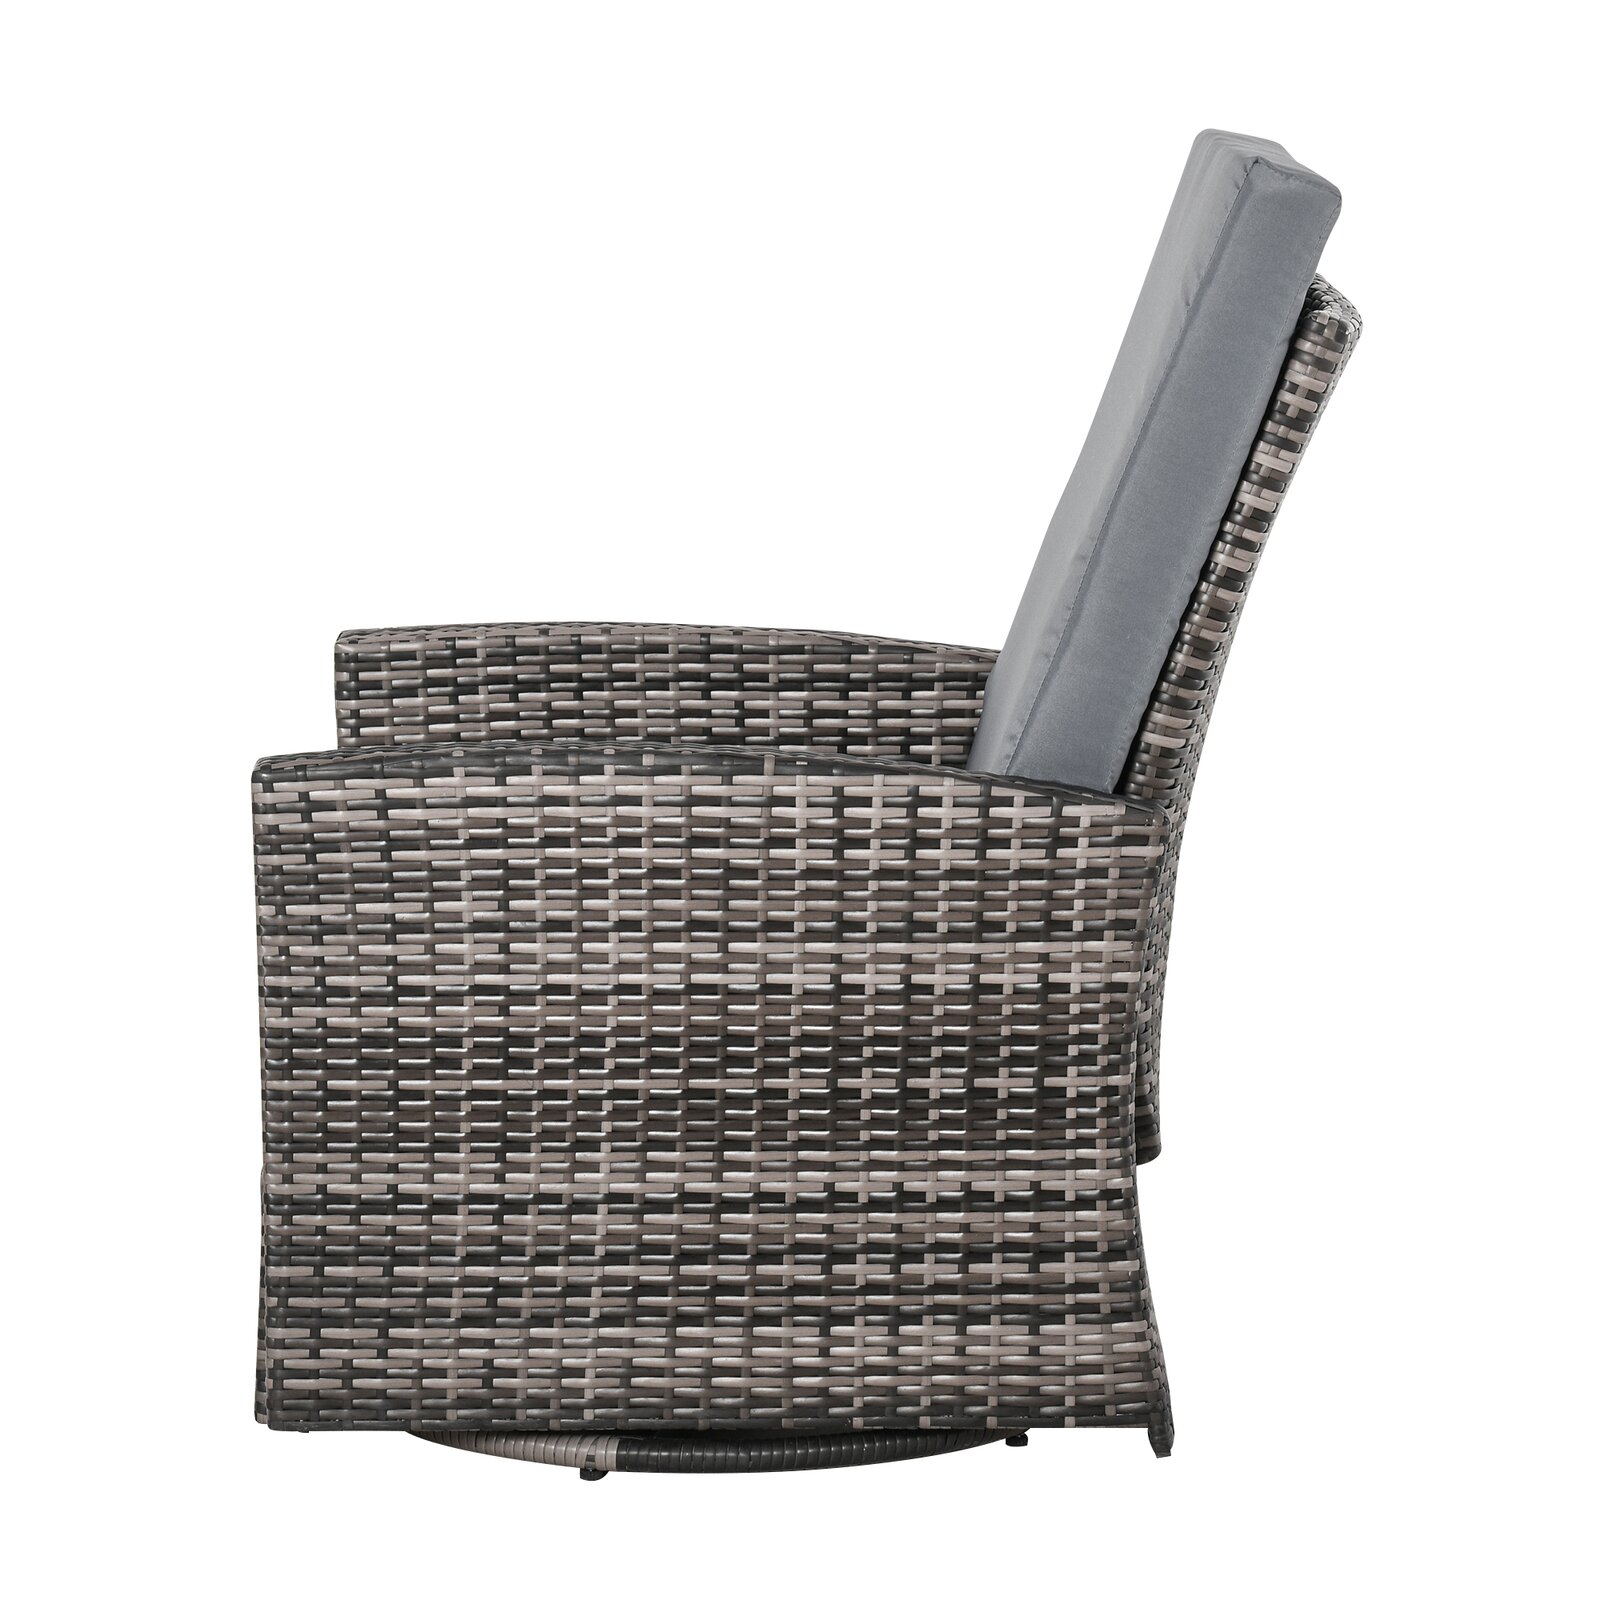 Harrill Swivel Recliner Patio Chair with Cushions, Reclining: Yes, Outer Frame Material: Wicker/Rattan - image 4 of 5